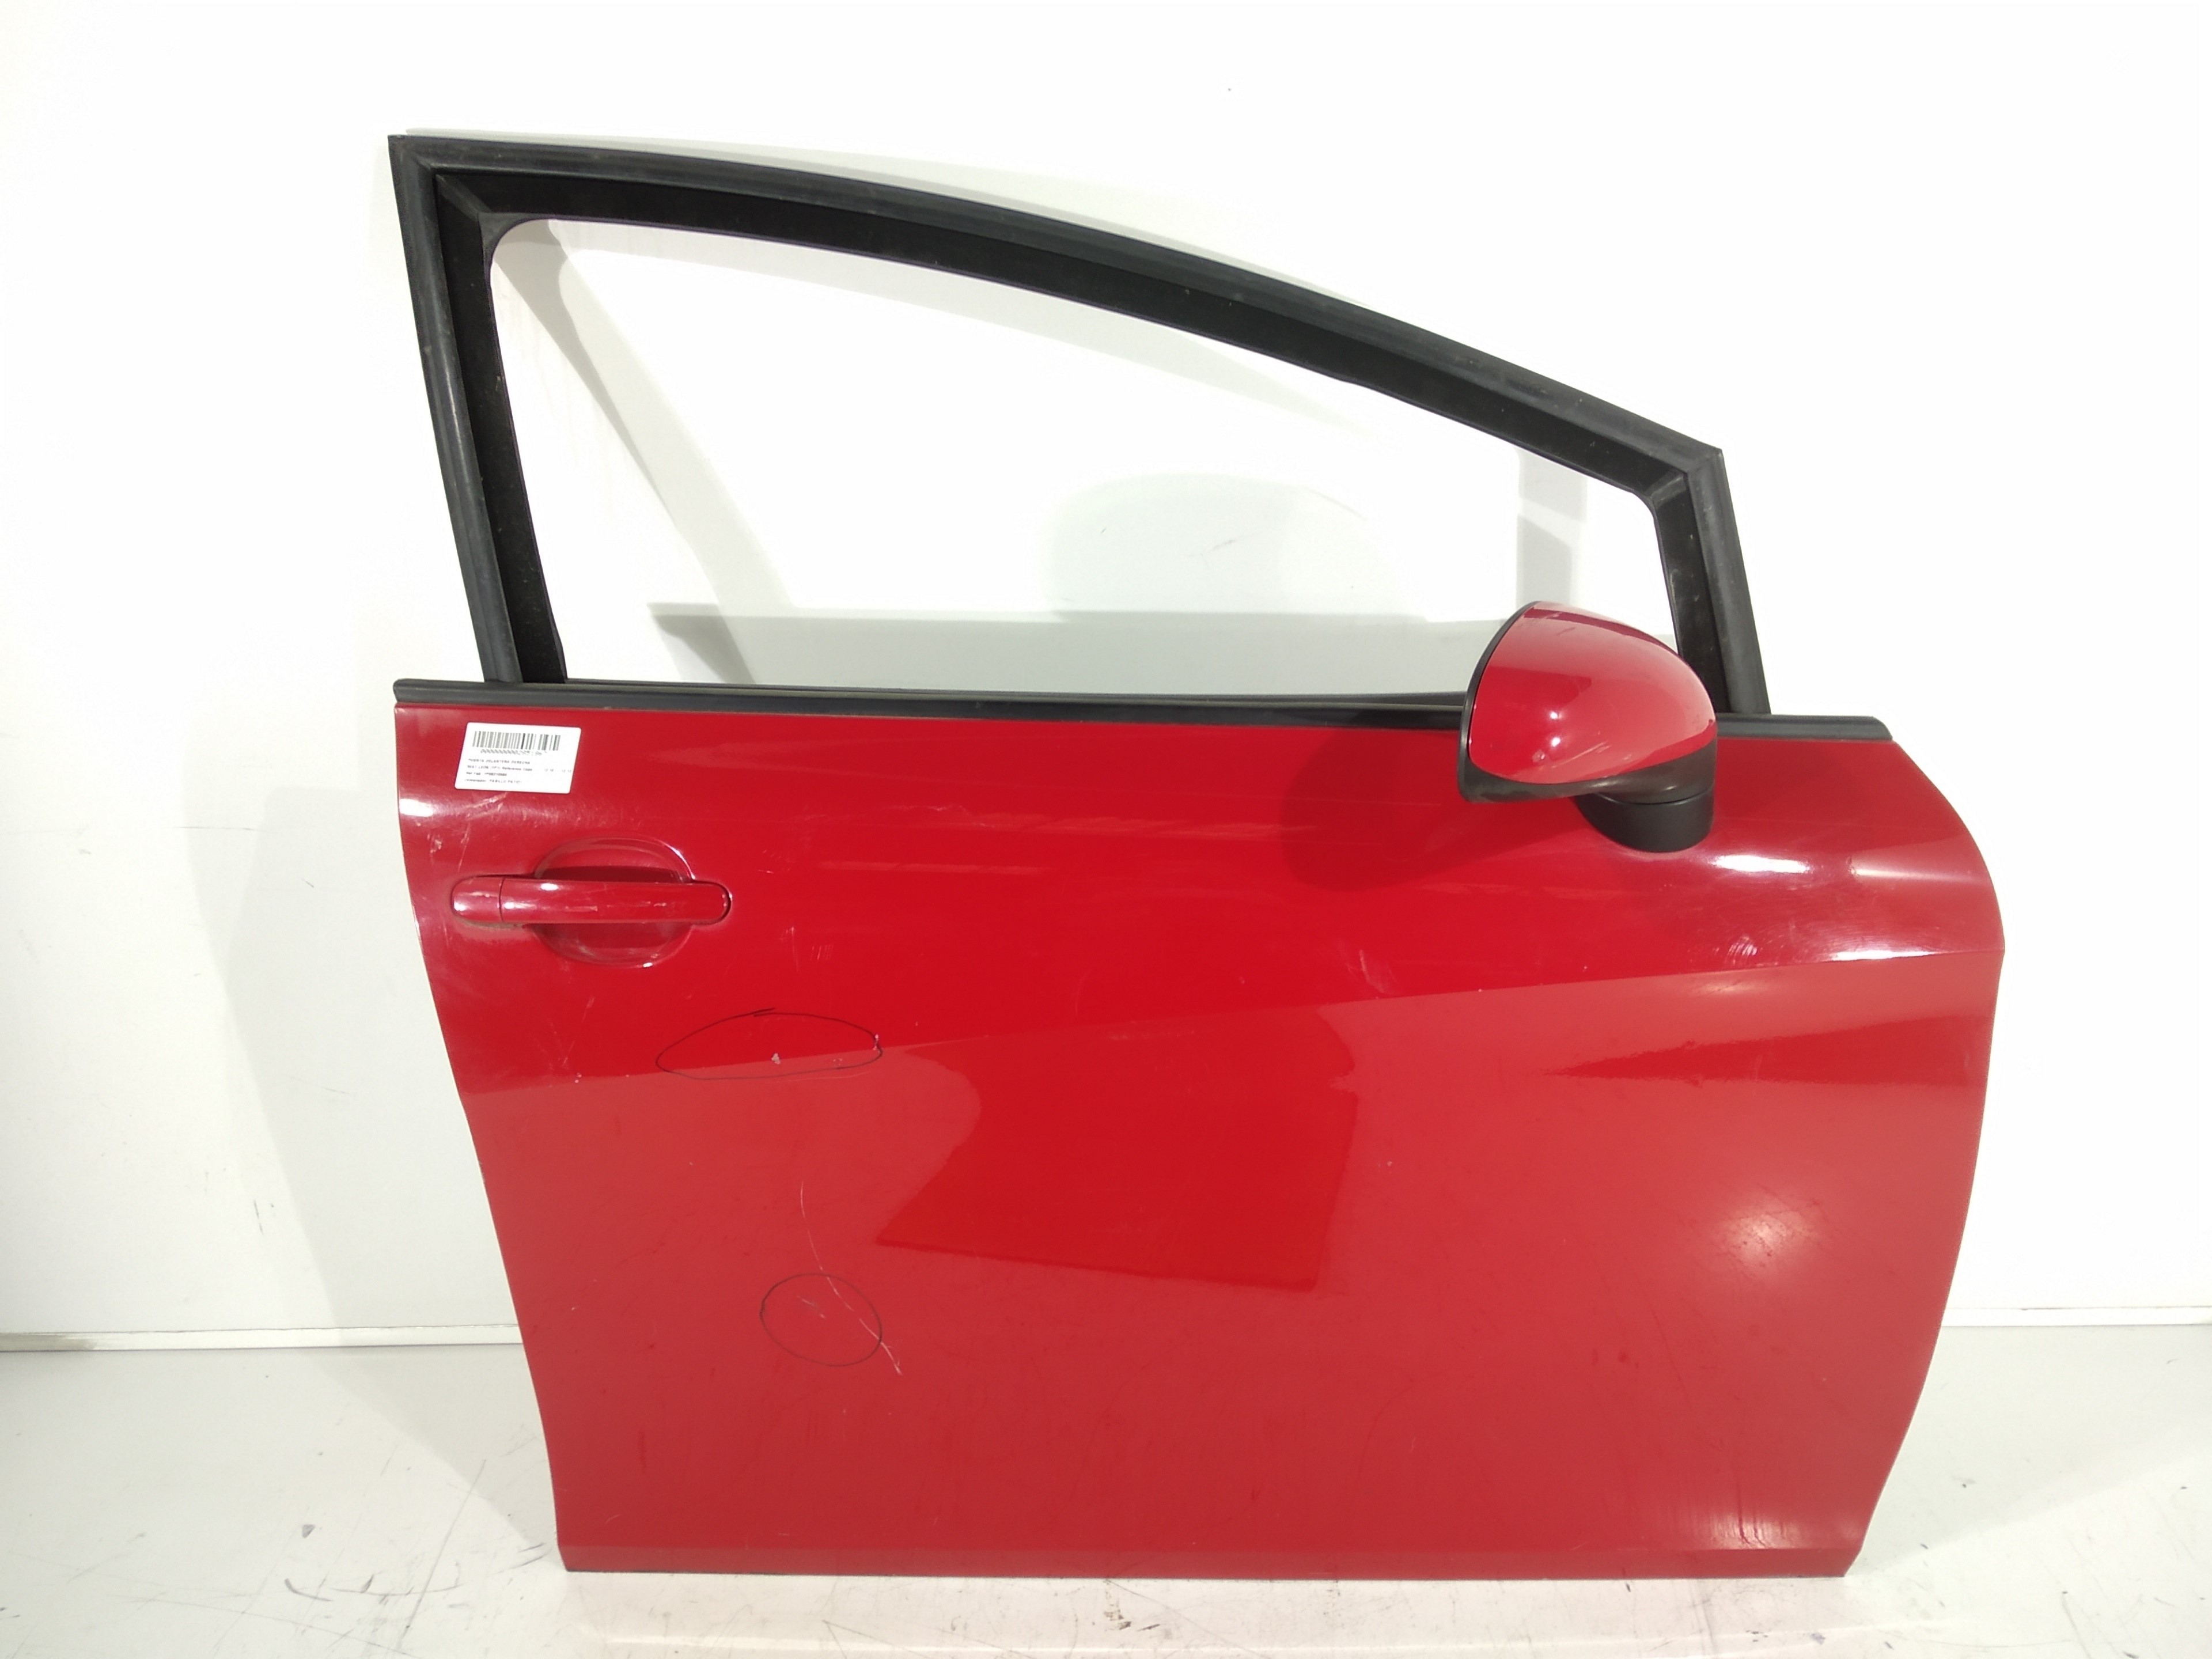 SEAT Leon 2 generation (2005-2012) Front Right Door 1P0831056A, 1P0831056A, 1P0831056A 19337853